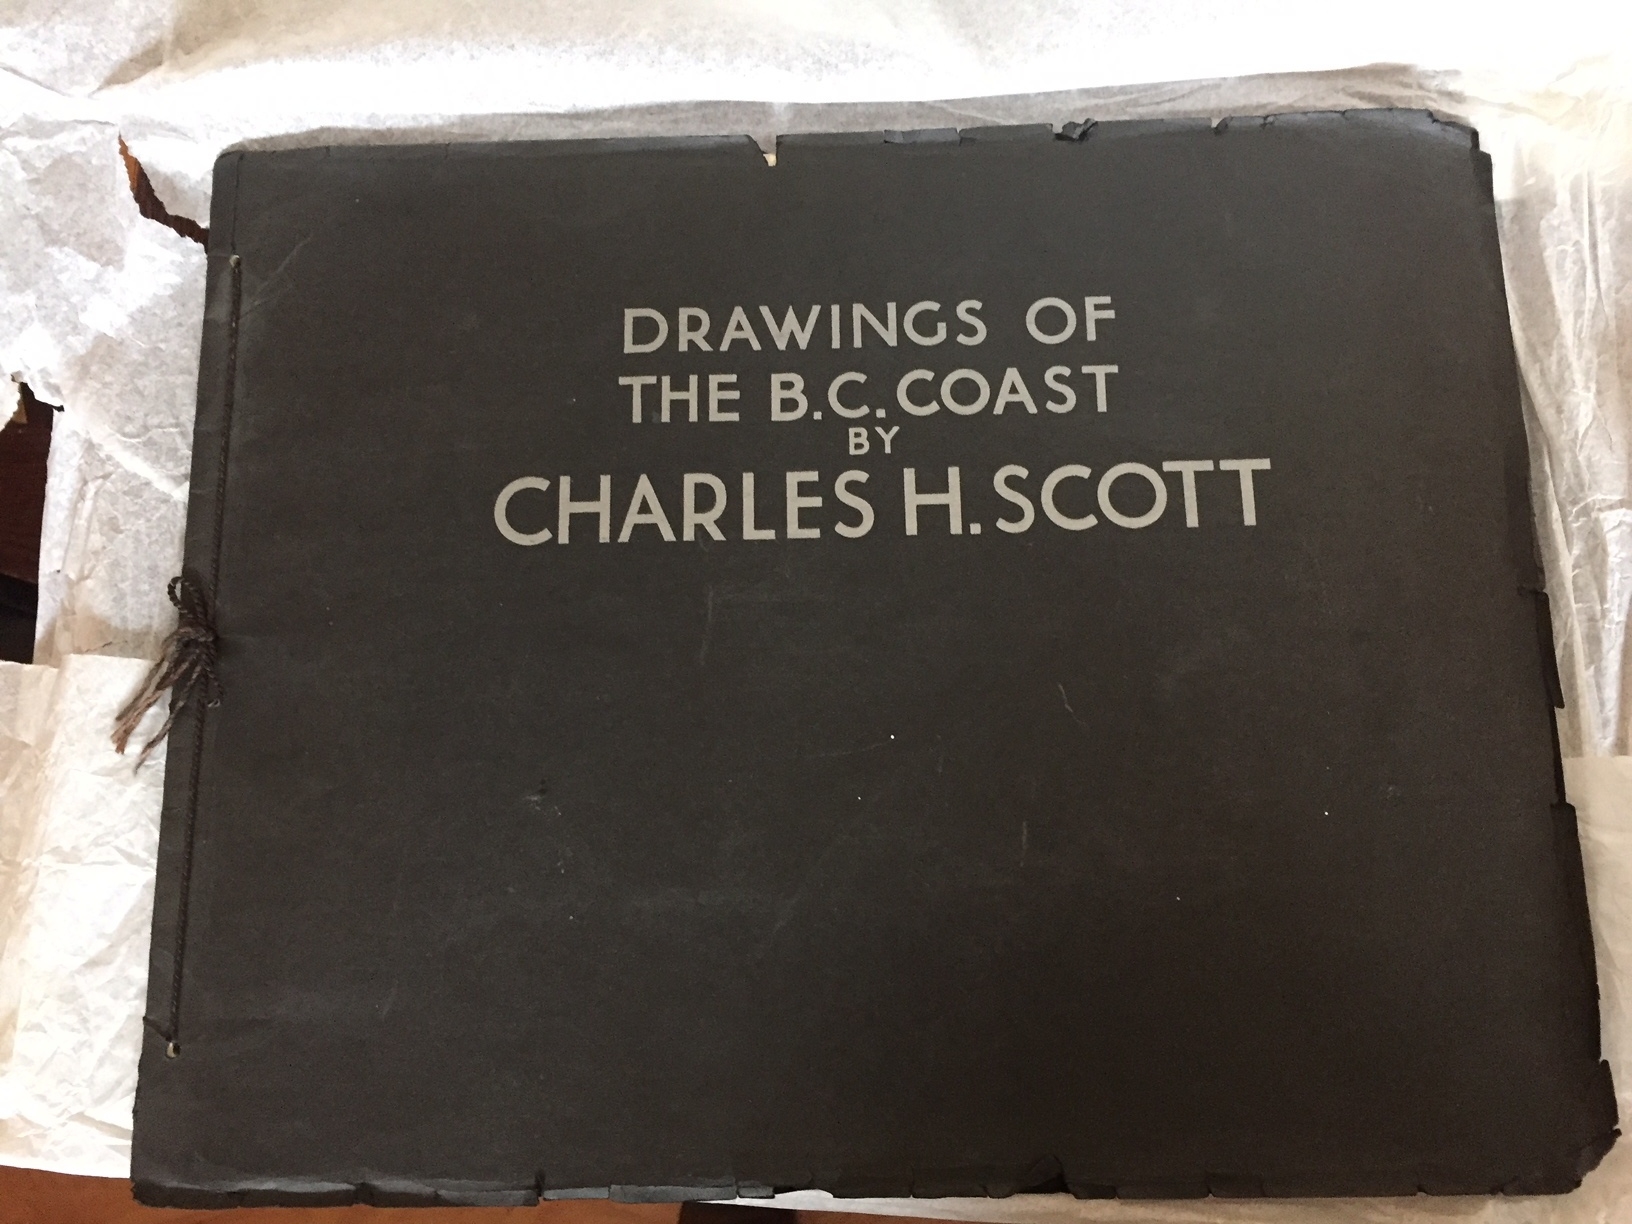 Drawings of the B.C. Coast by Charles H. Scott